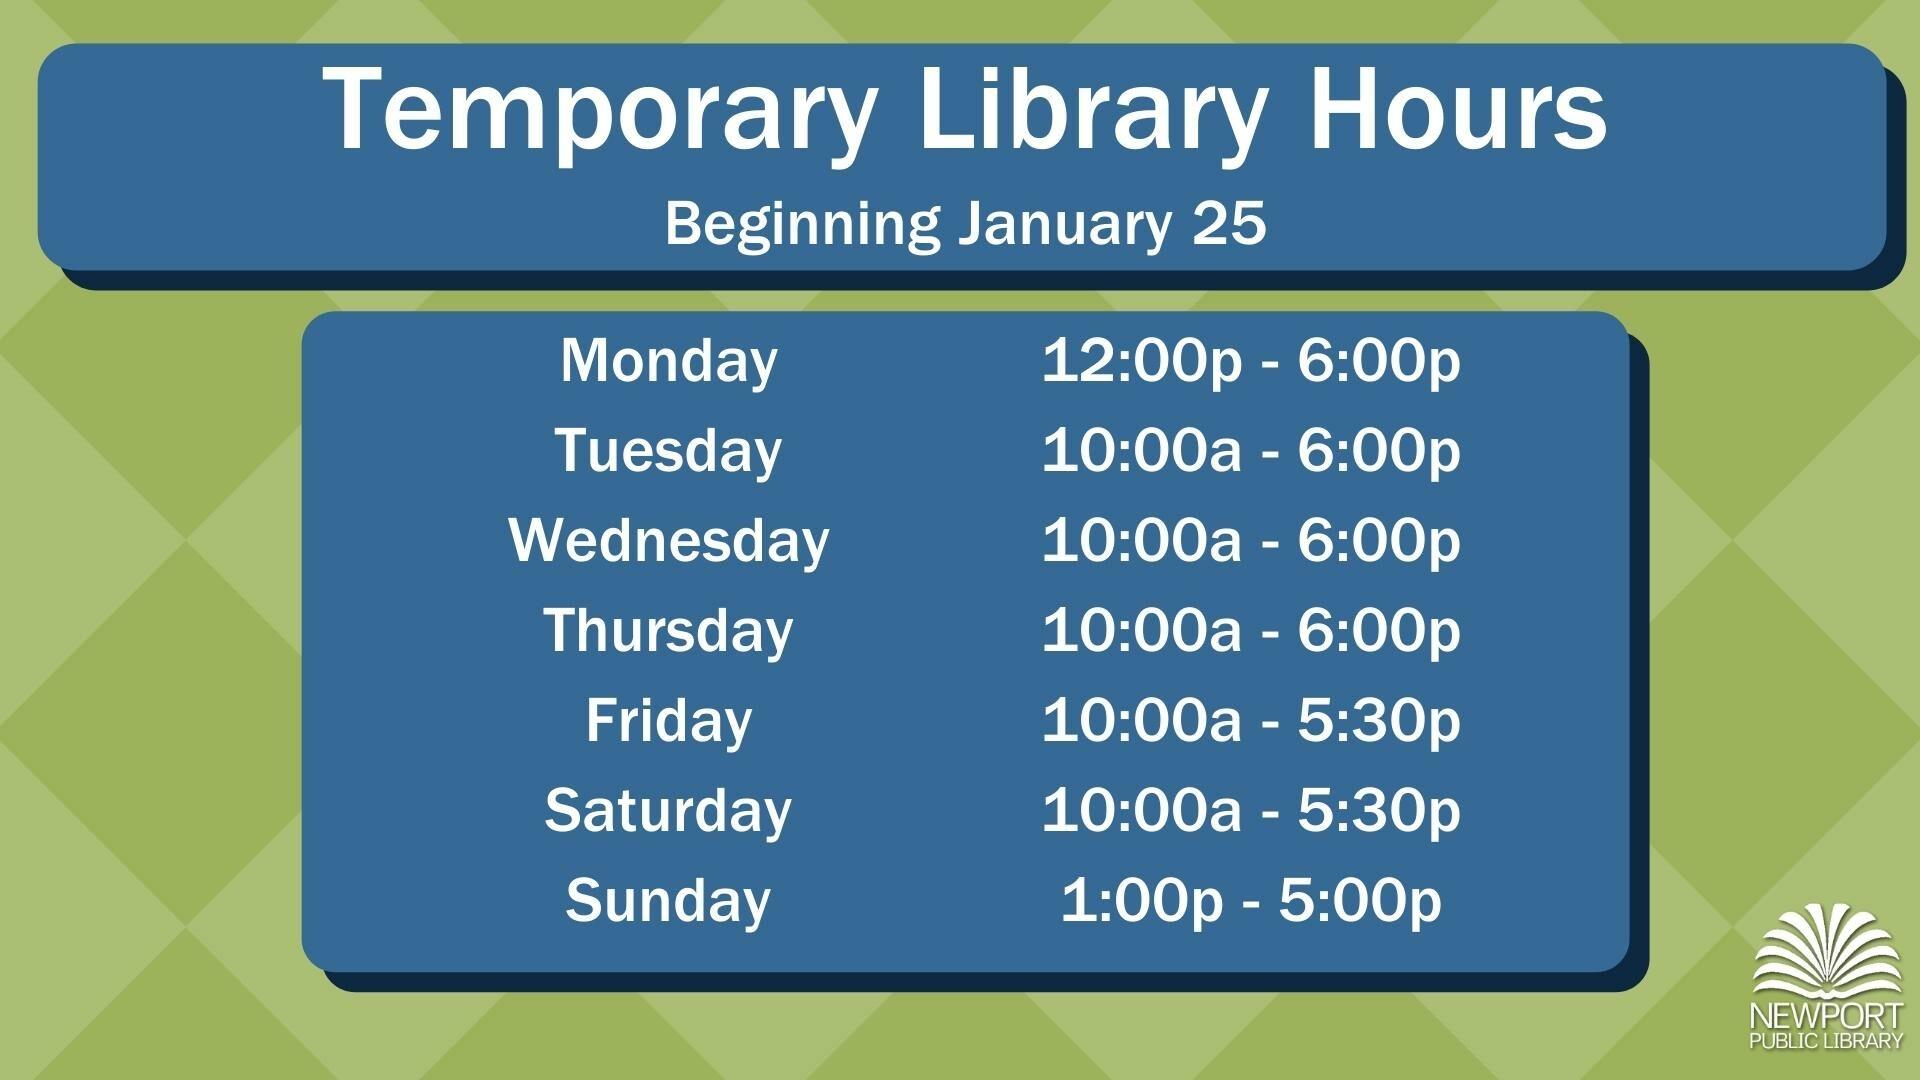 Temporary Library Hours